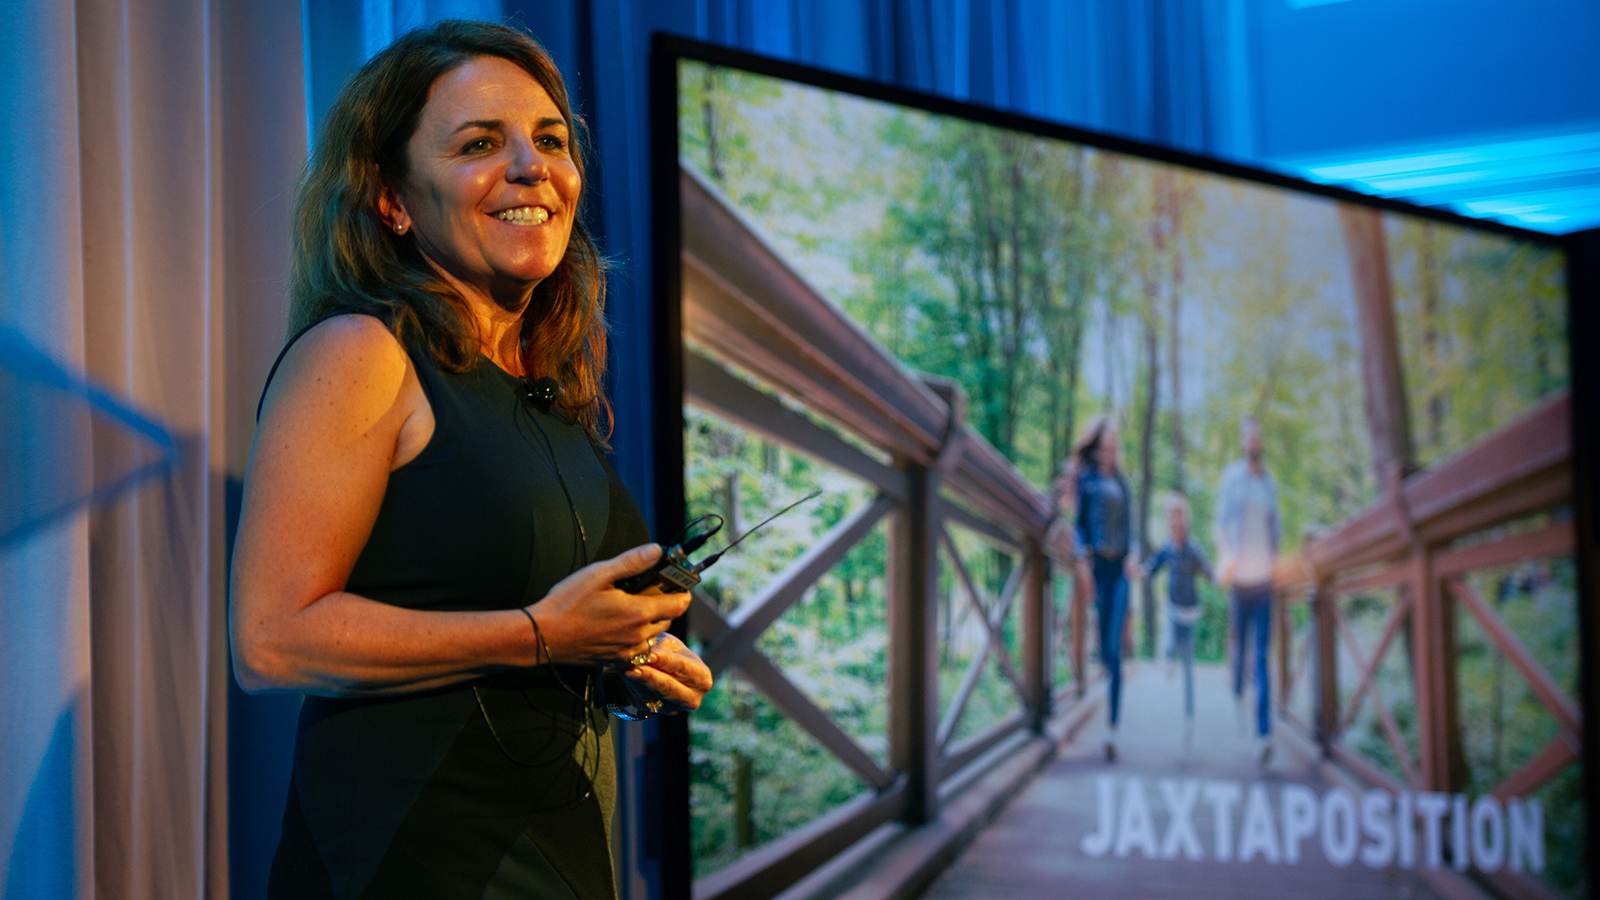 JAX researcher Cat Lutz speaking at a JAXtaposition conference in 2018